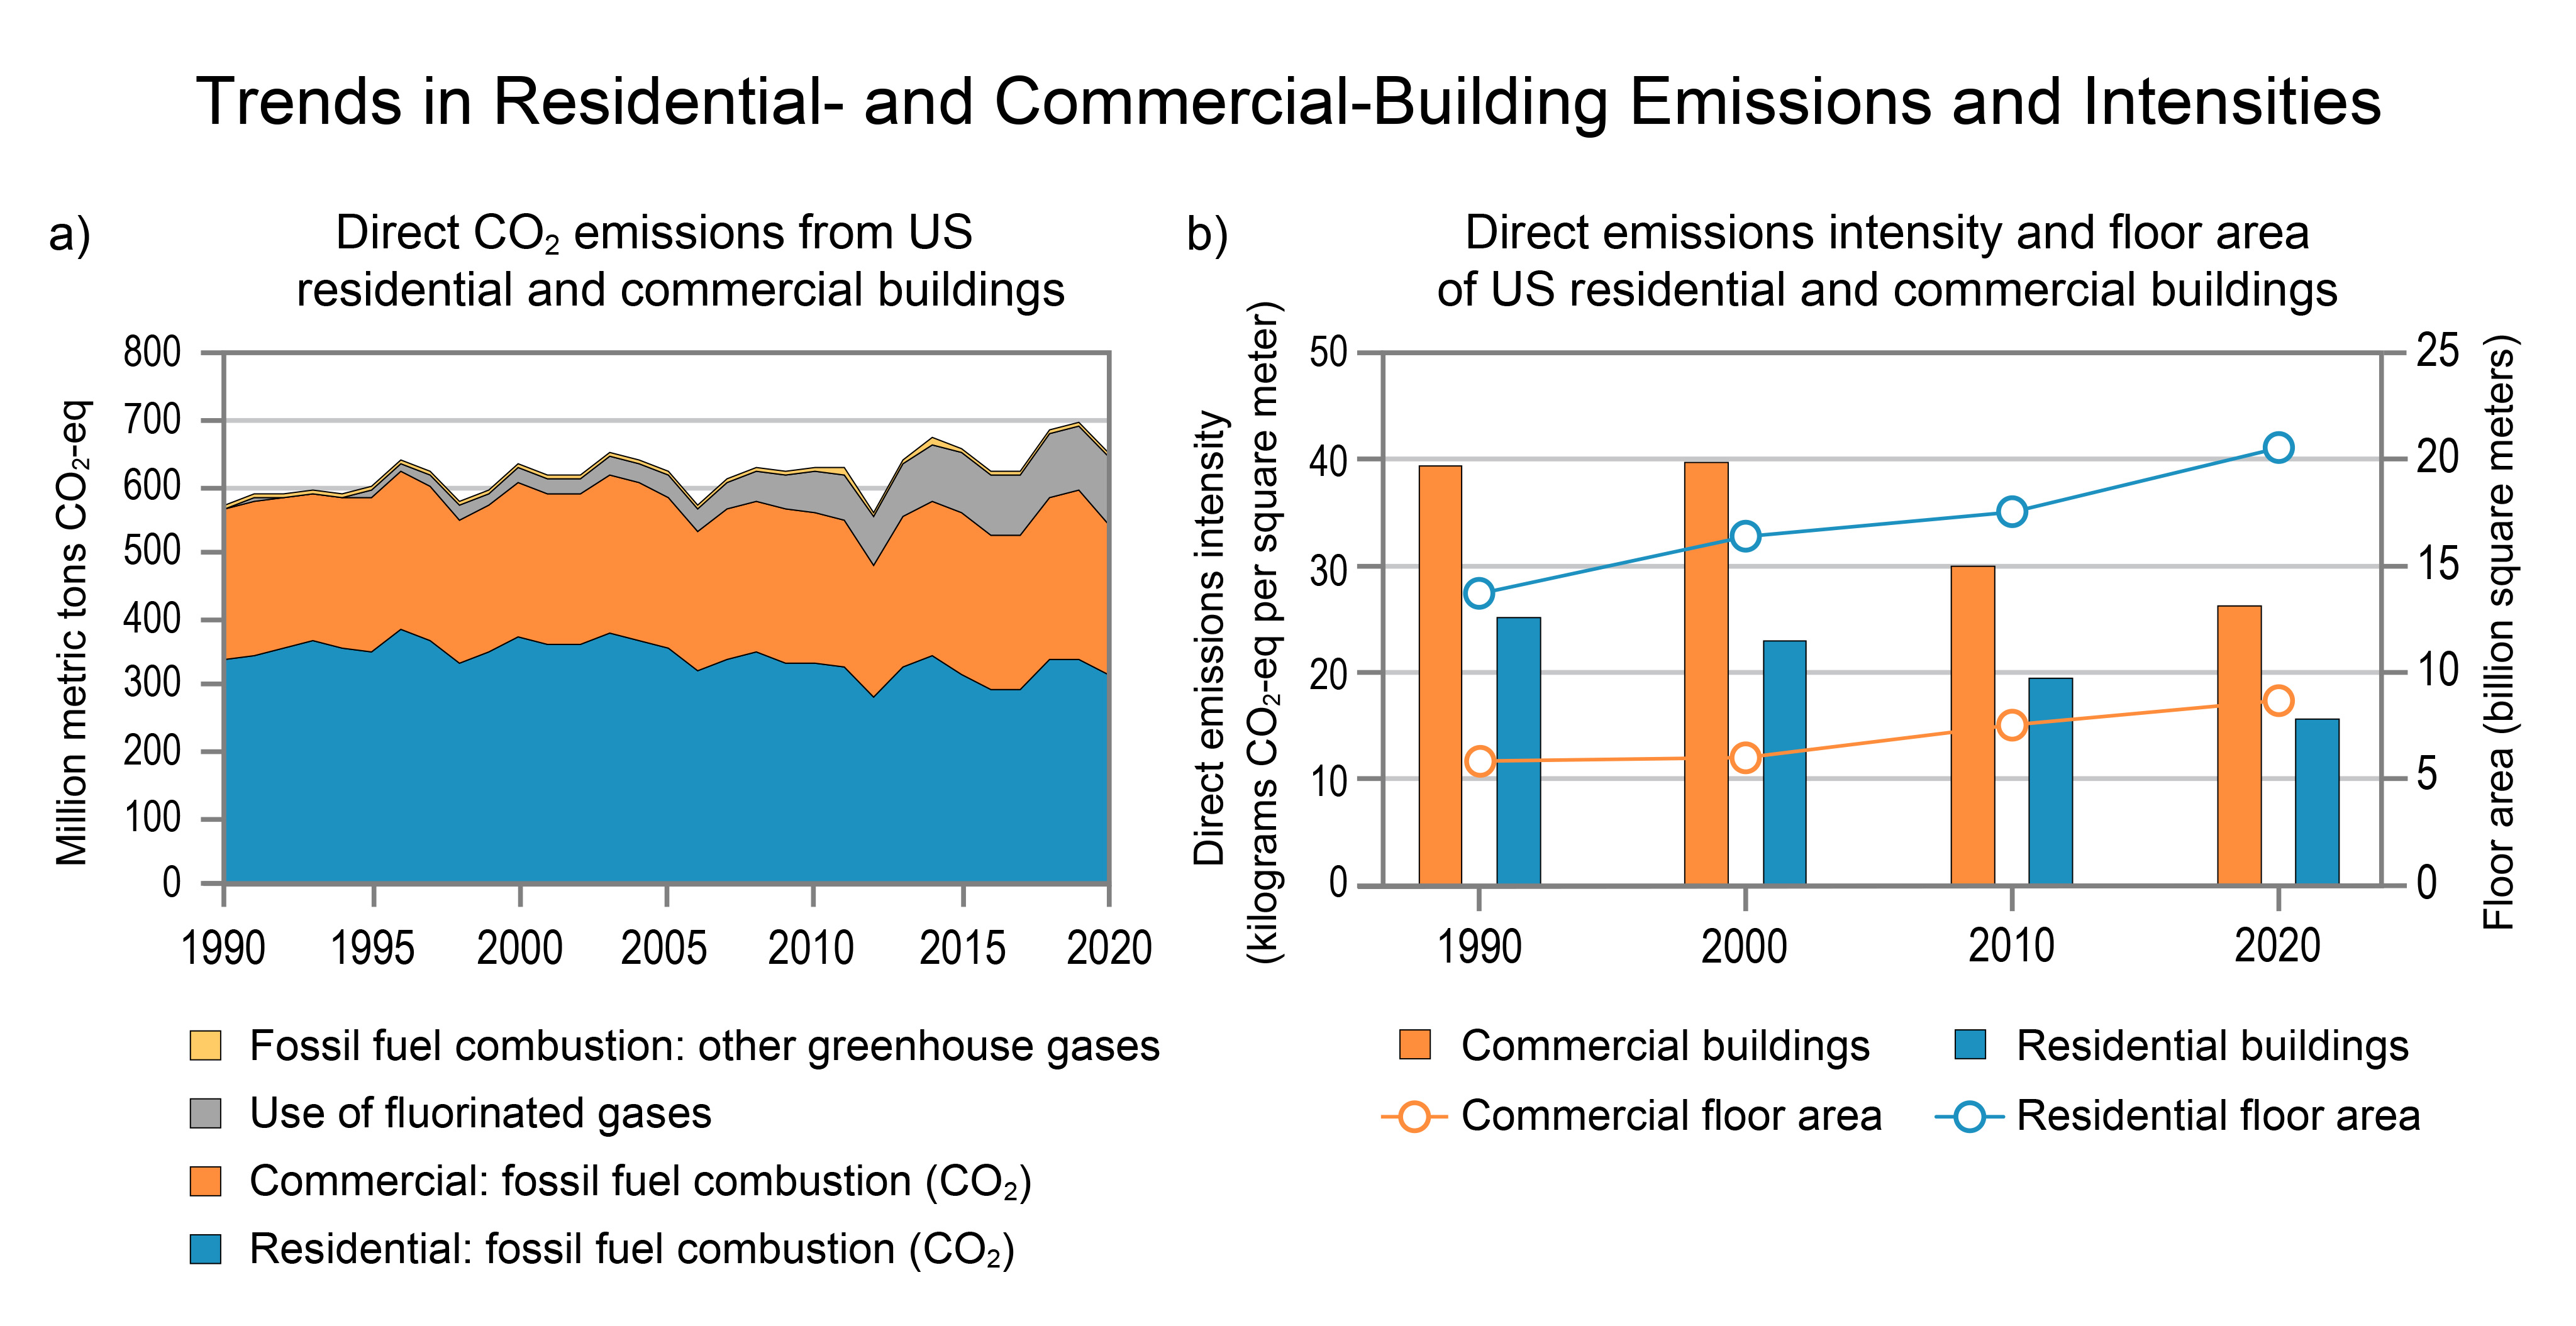 Trends in Residential- and Commercial-Building Emissions and Intensities